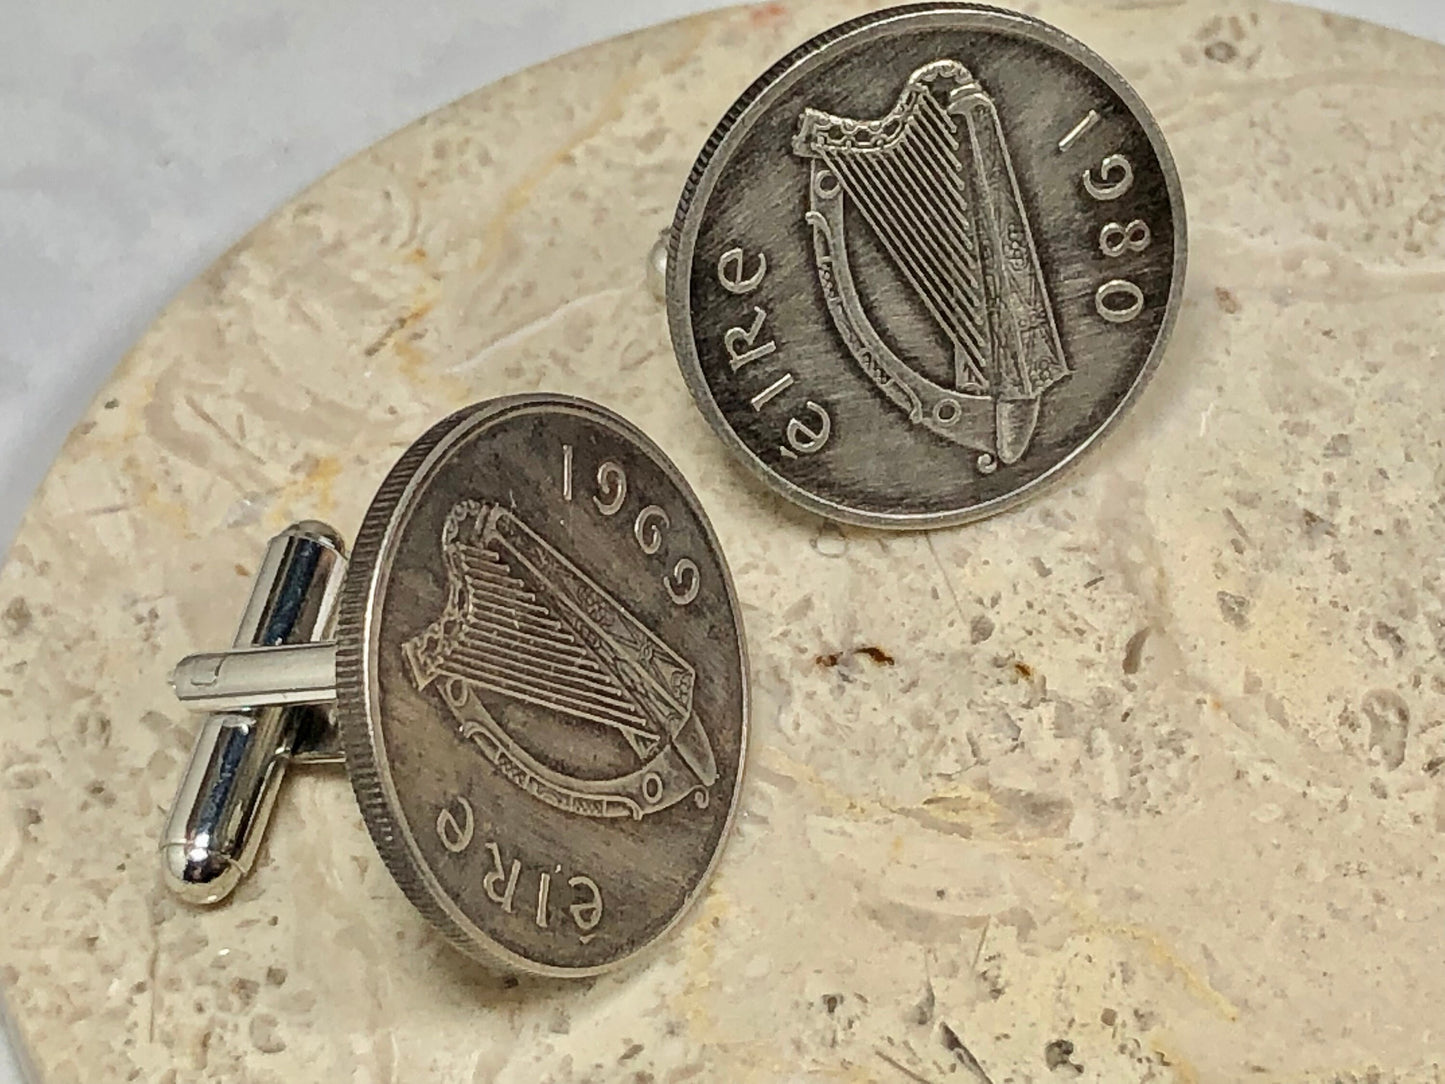 Ireland Coin Cuff Links Irish 5 Pence Celtic Harp Personal Vintage Handmade Jewelry Gift Friend Charm For Him Her World Coin Collector